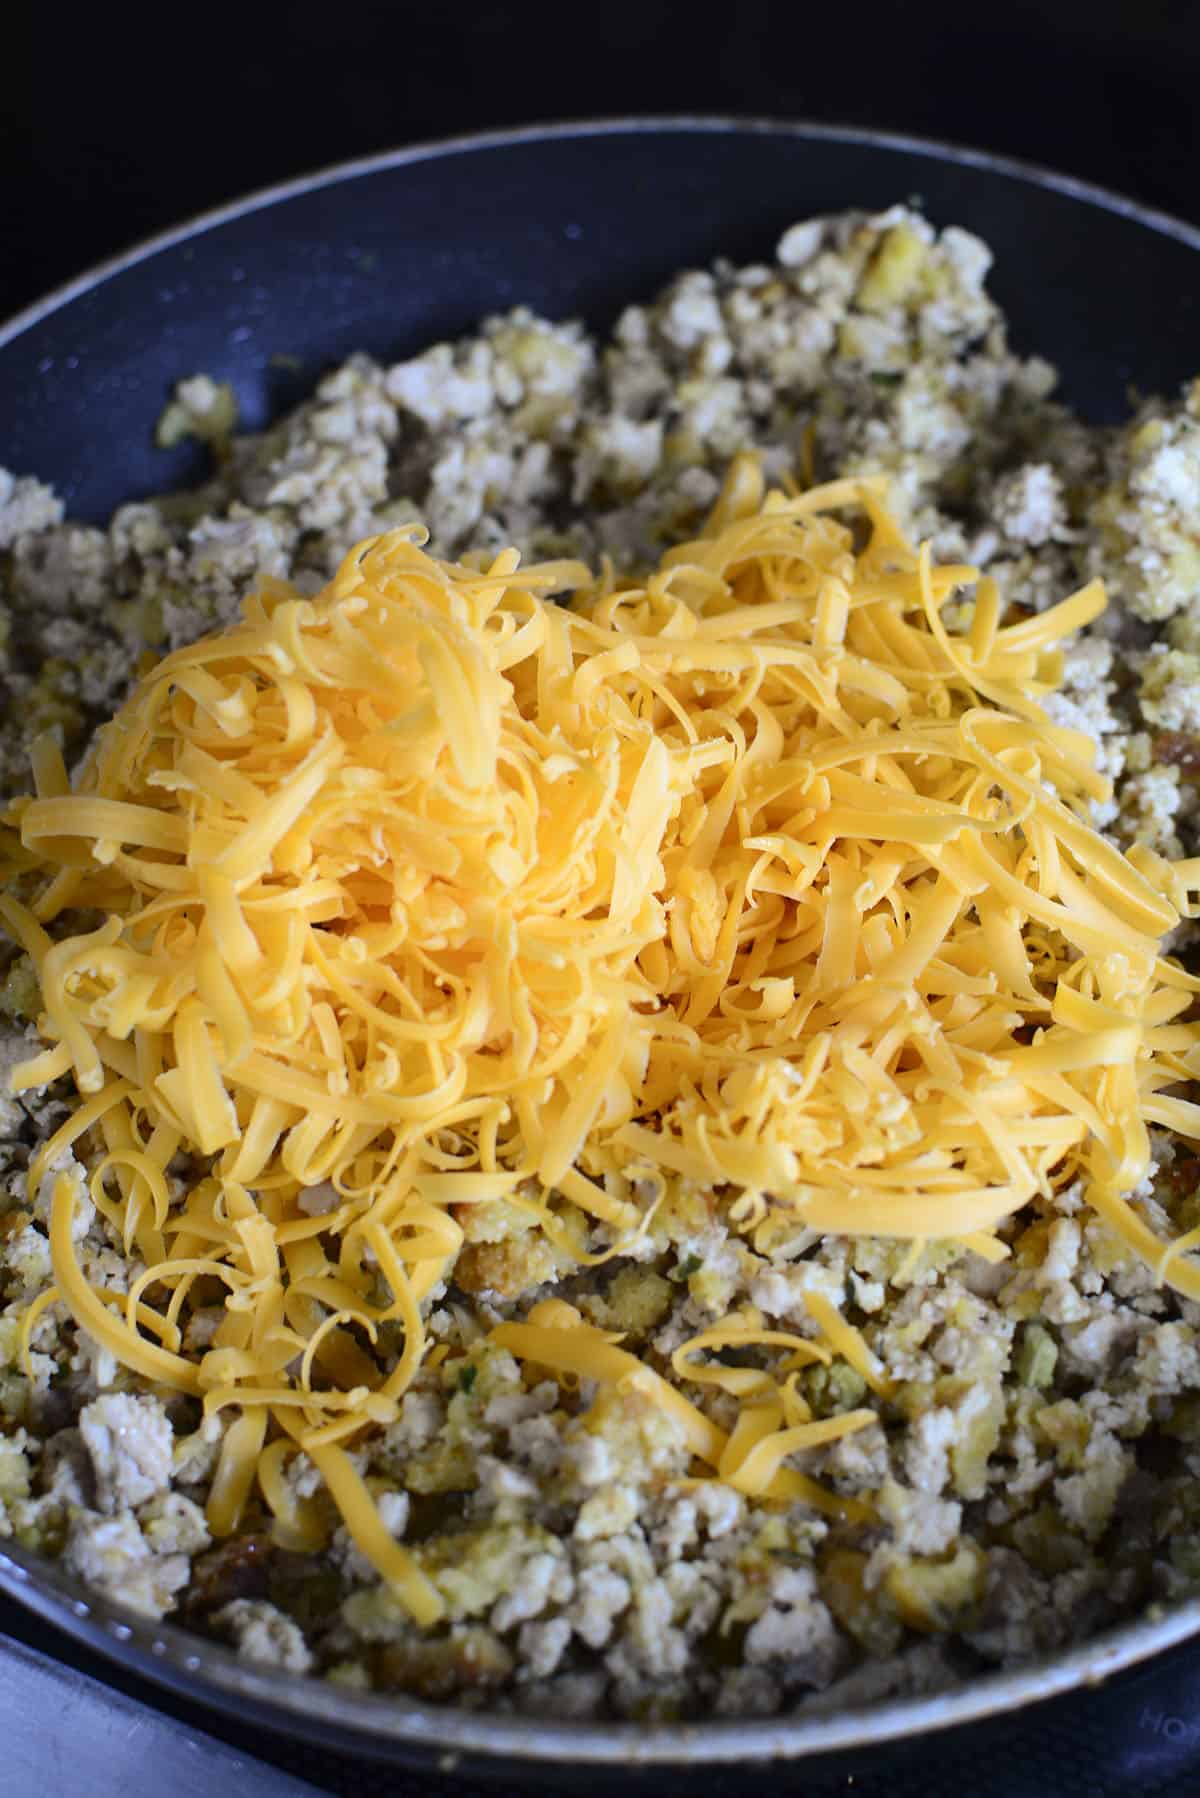 Adding the shredded cheese on top of the chicken mixture.